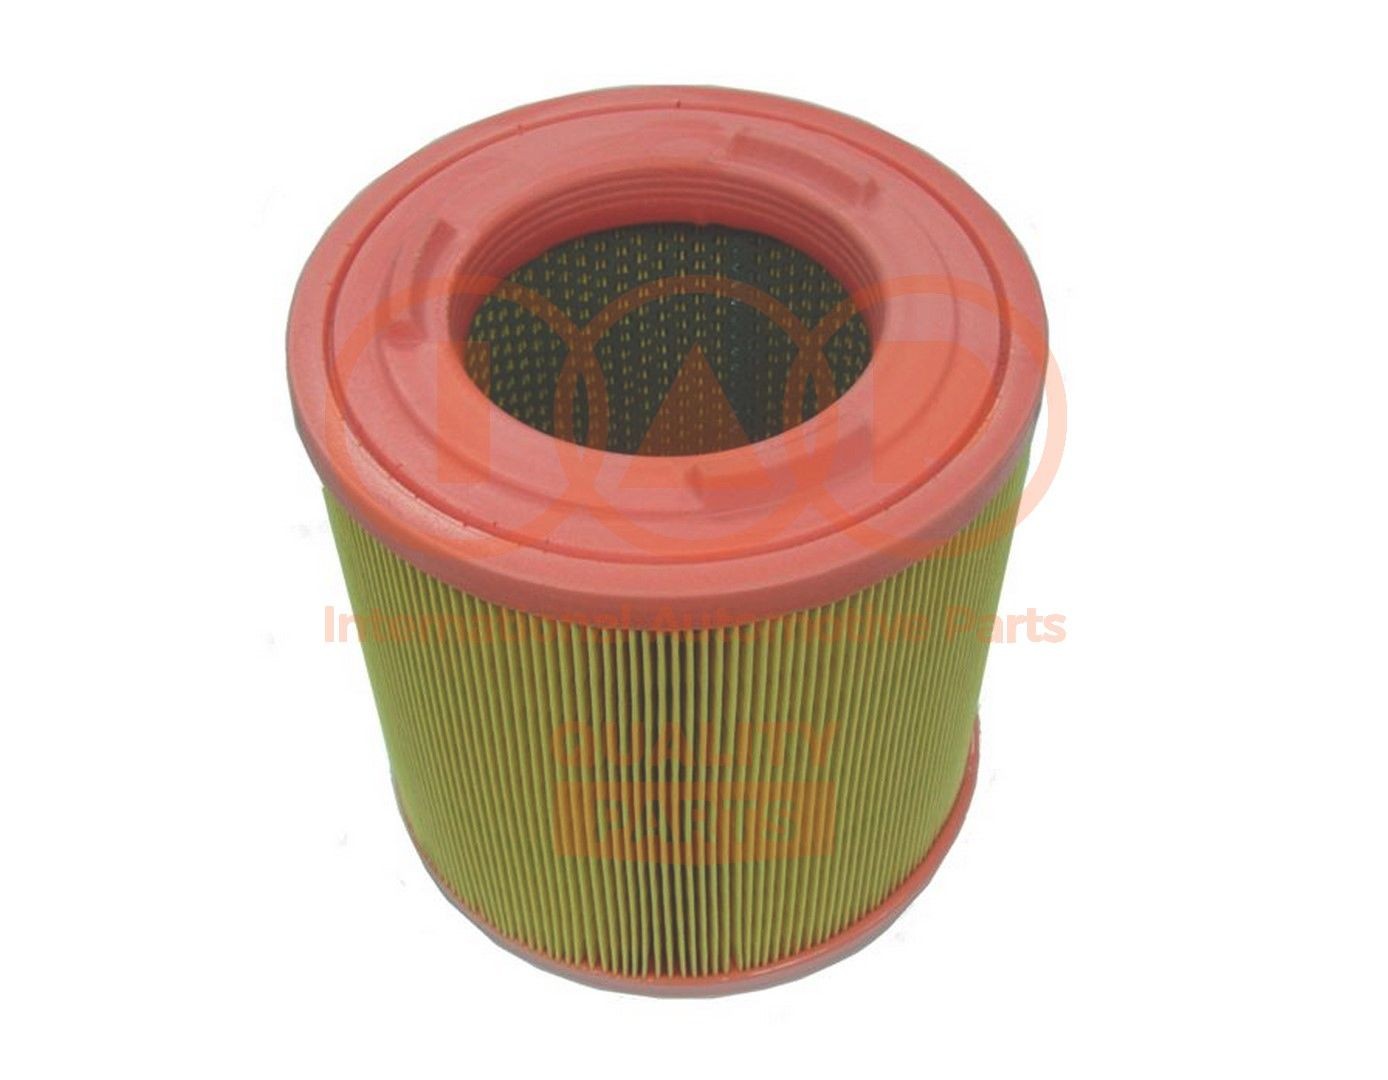 BMW 1 Series Air filter 14684043 IAP QUALITY PARTS 121-13172 online buy